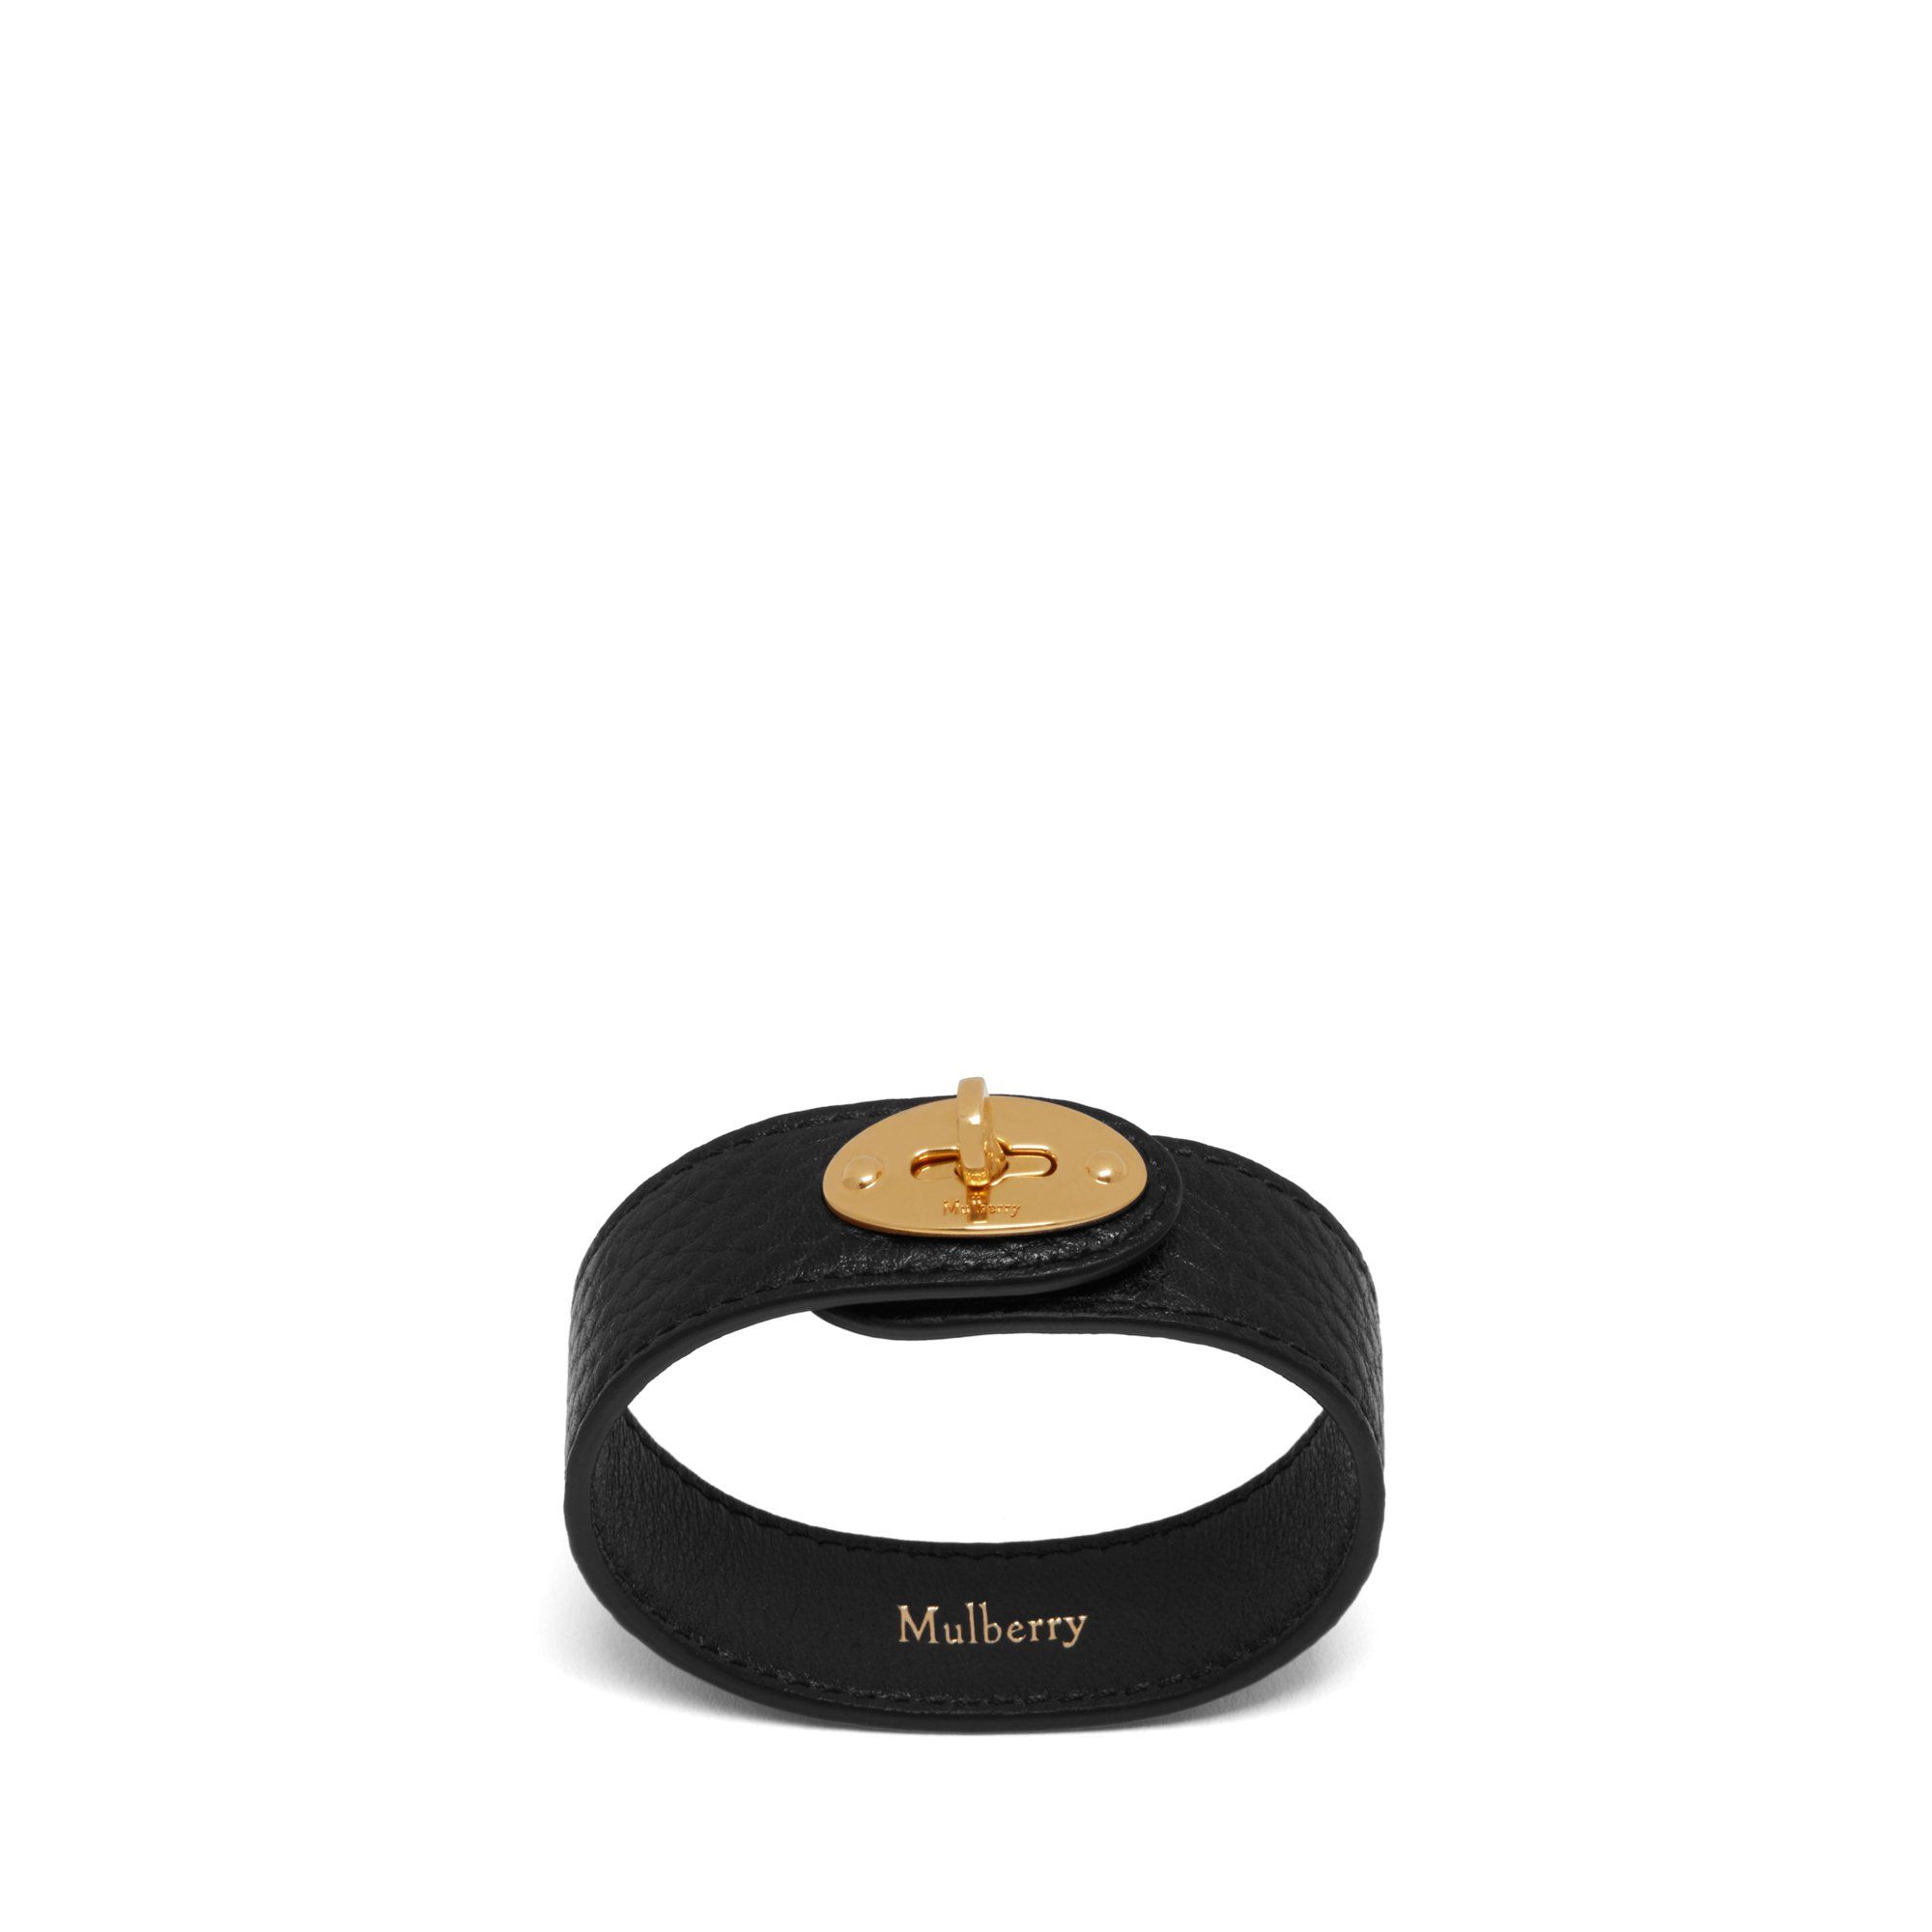 Mulberry Bayswater Leather Bracelet In Black